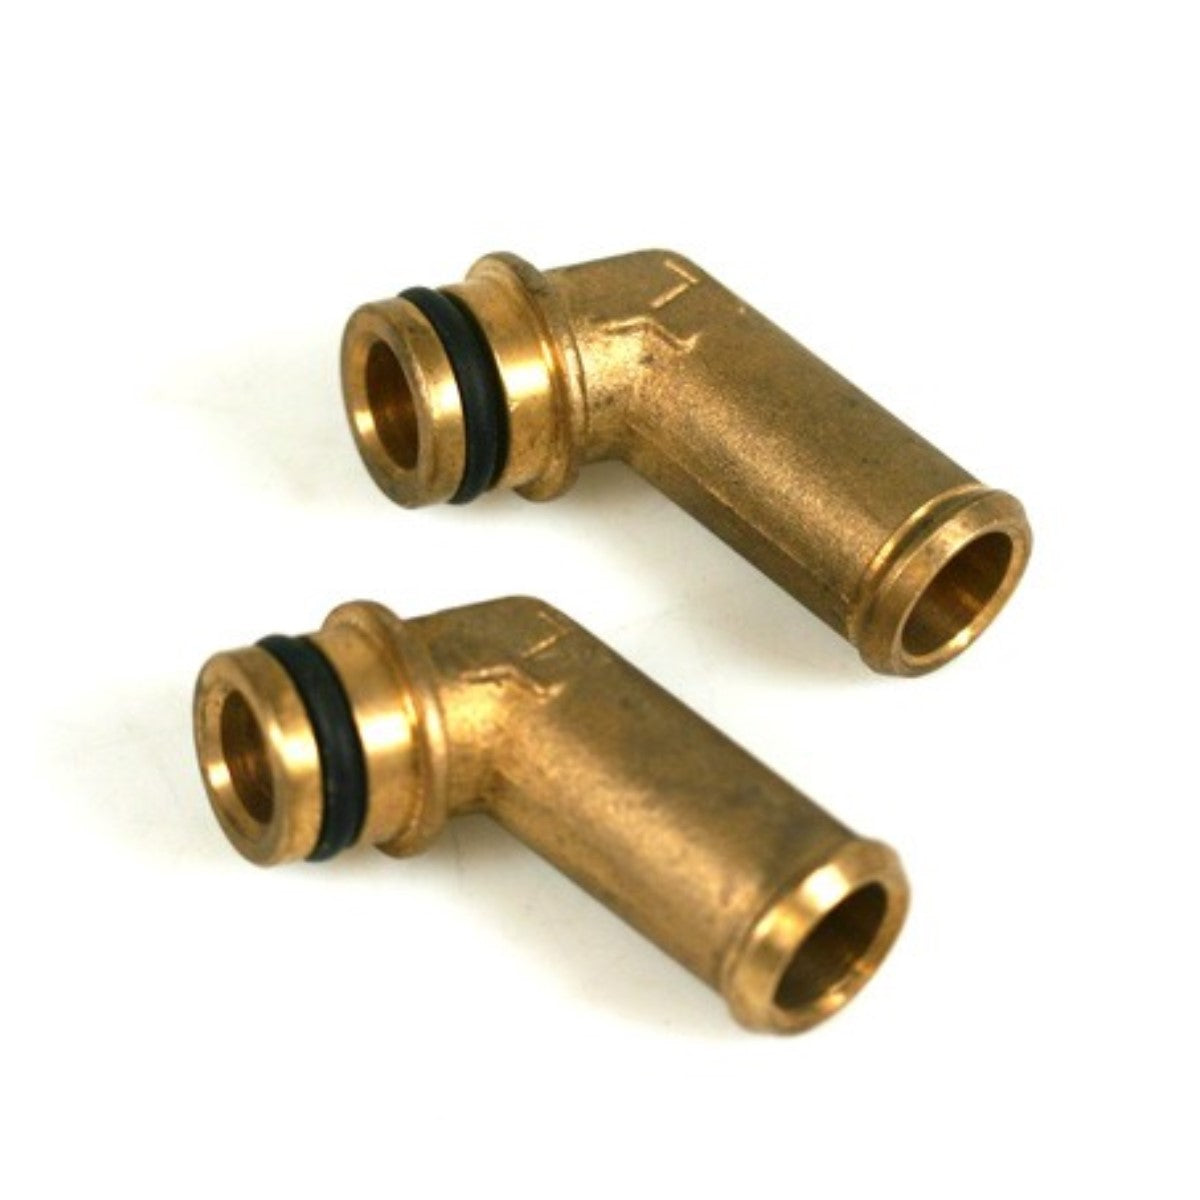 BRC brass water connection for Genius reducer incl. O-Rings (2 pieces)